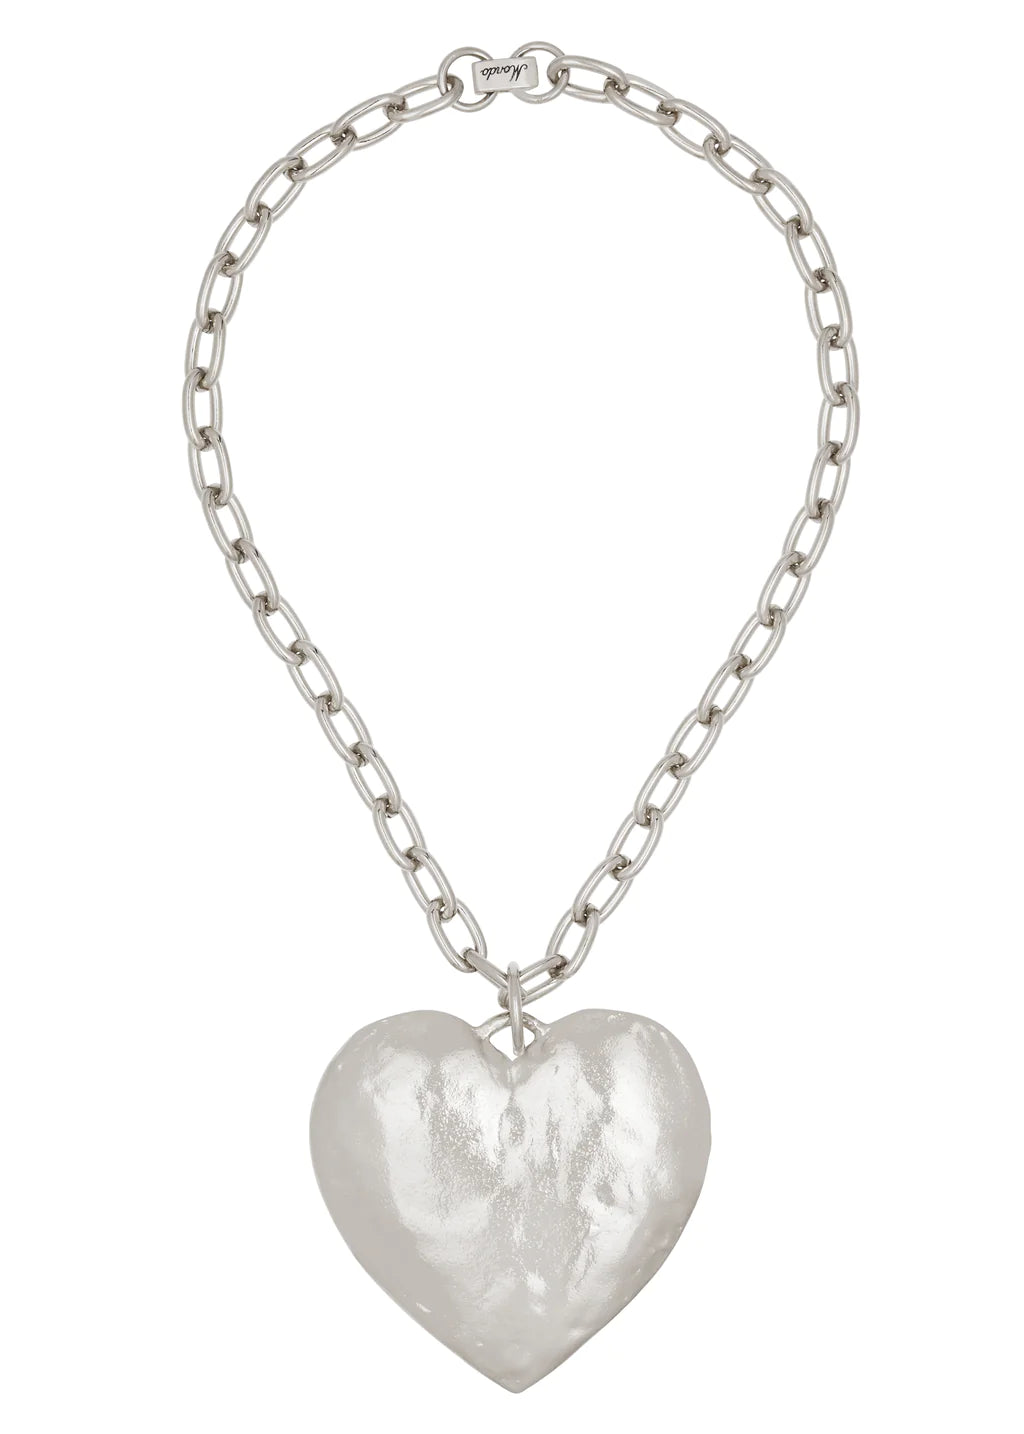 Silver-tone heart necklace on cable chain